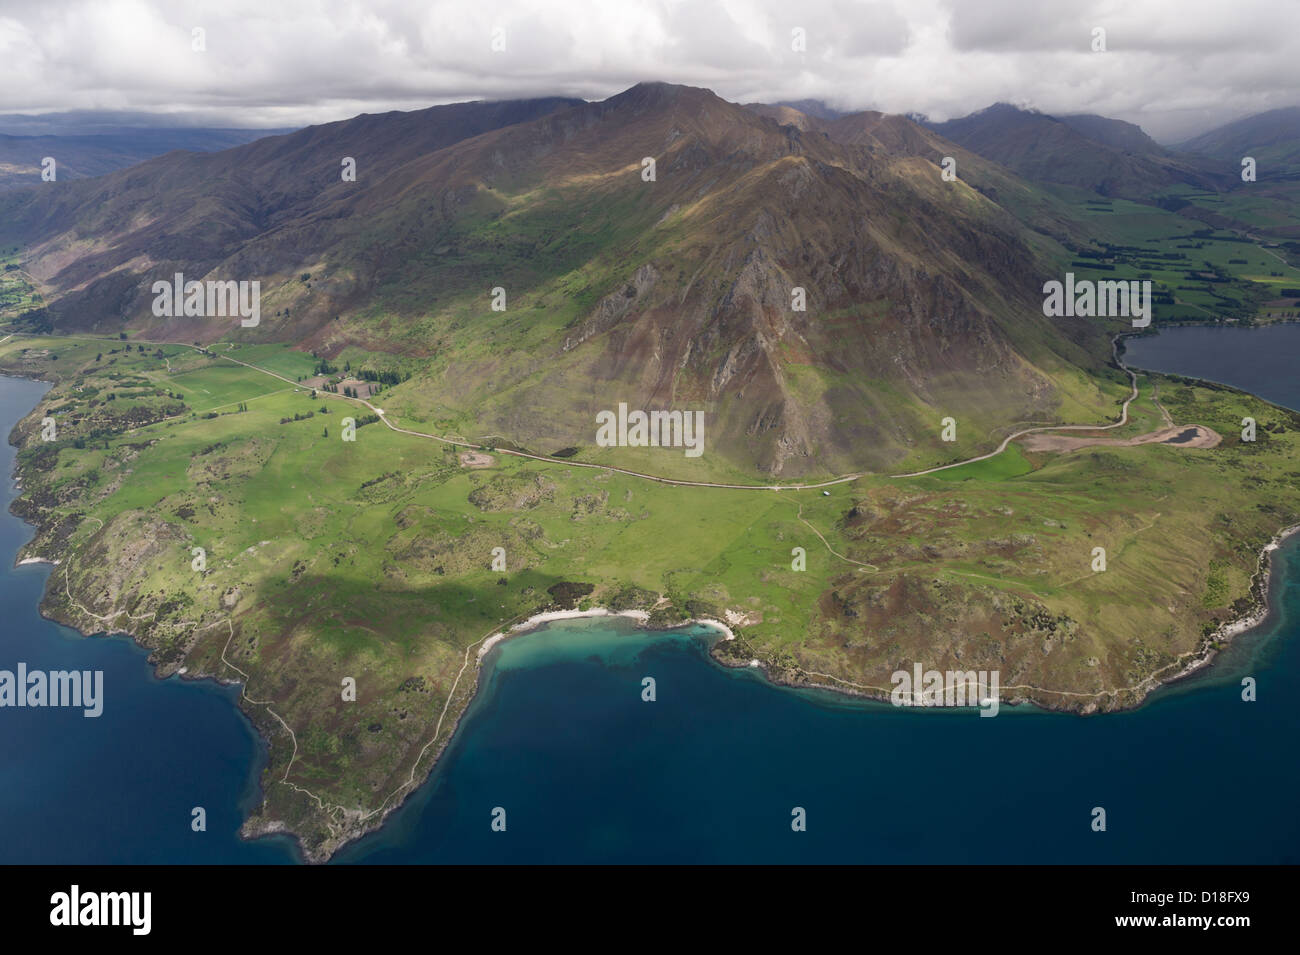 Aerial view of mountain and coastline Stock Photo